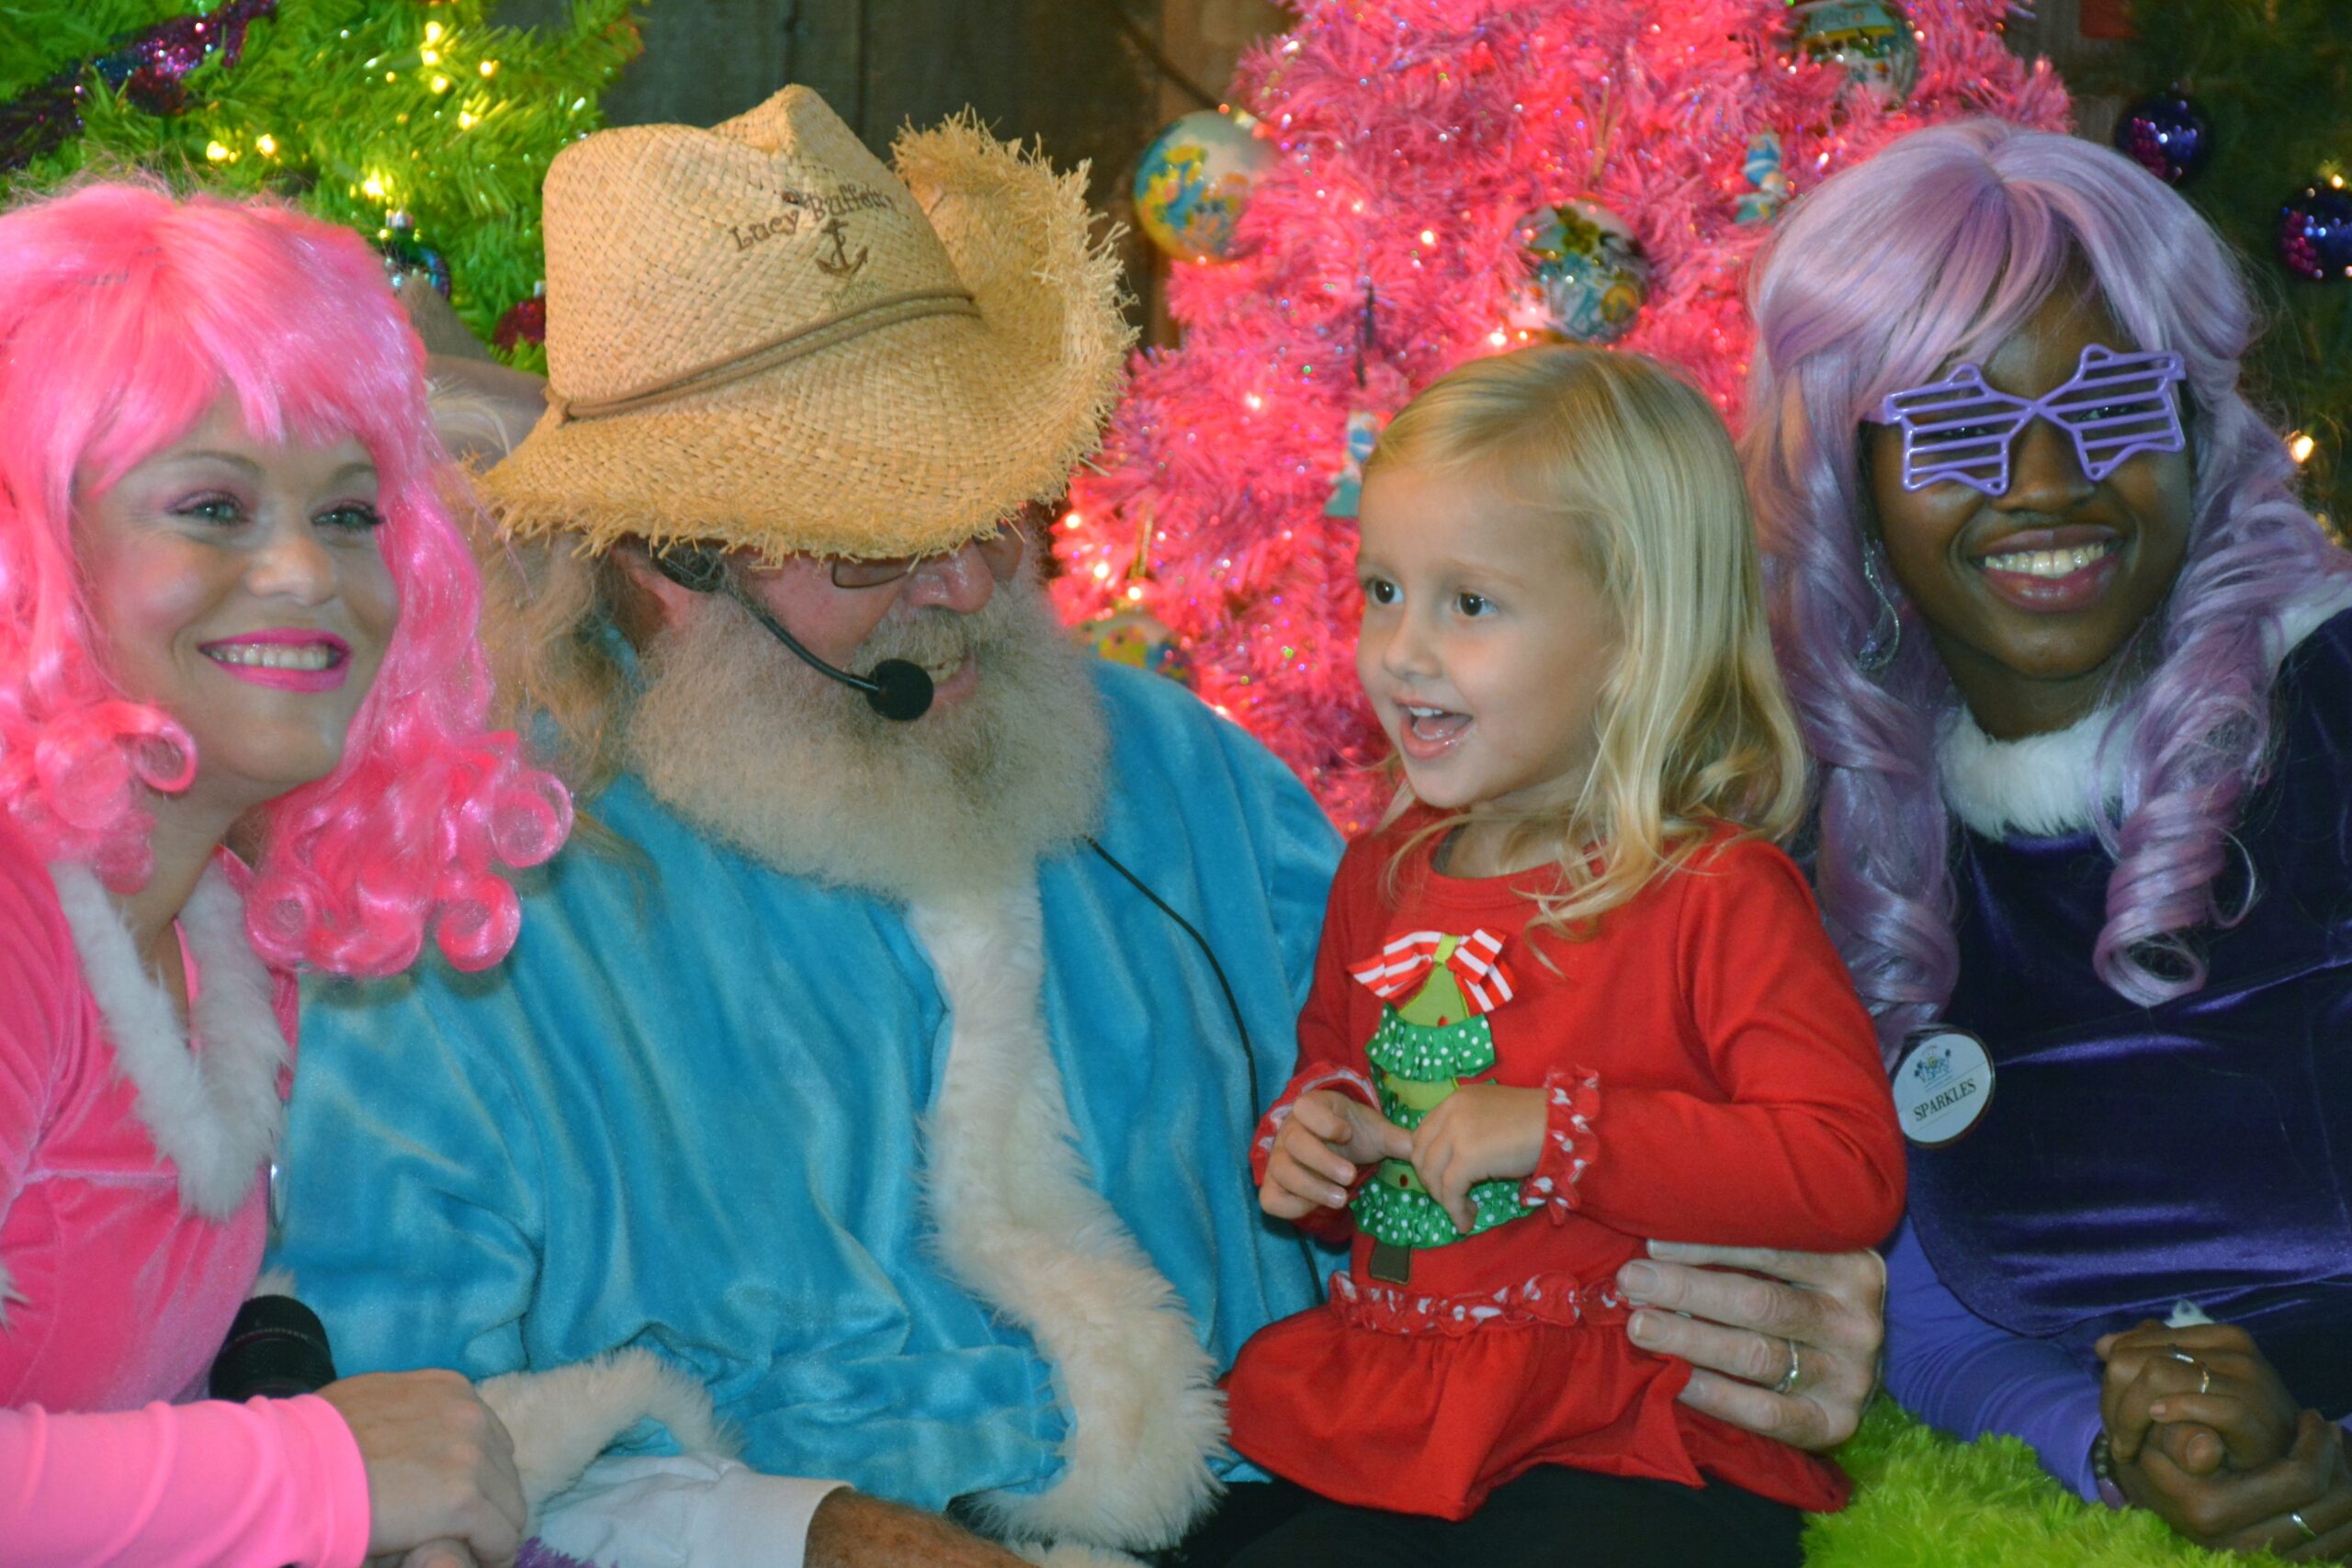 Billy Claus to visit kids at LuLu’s on December 11